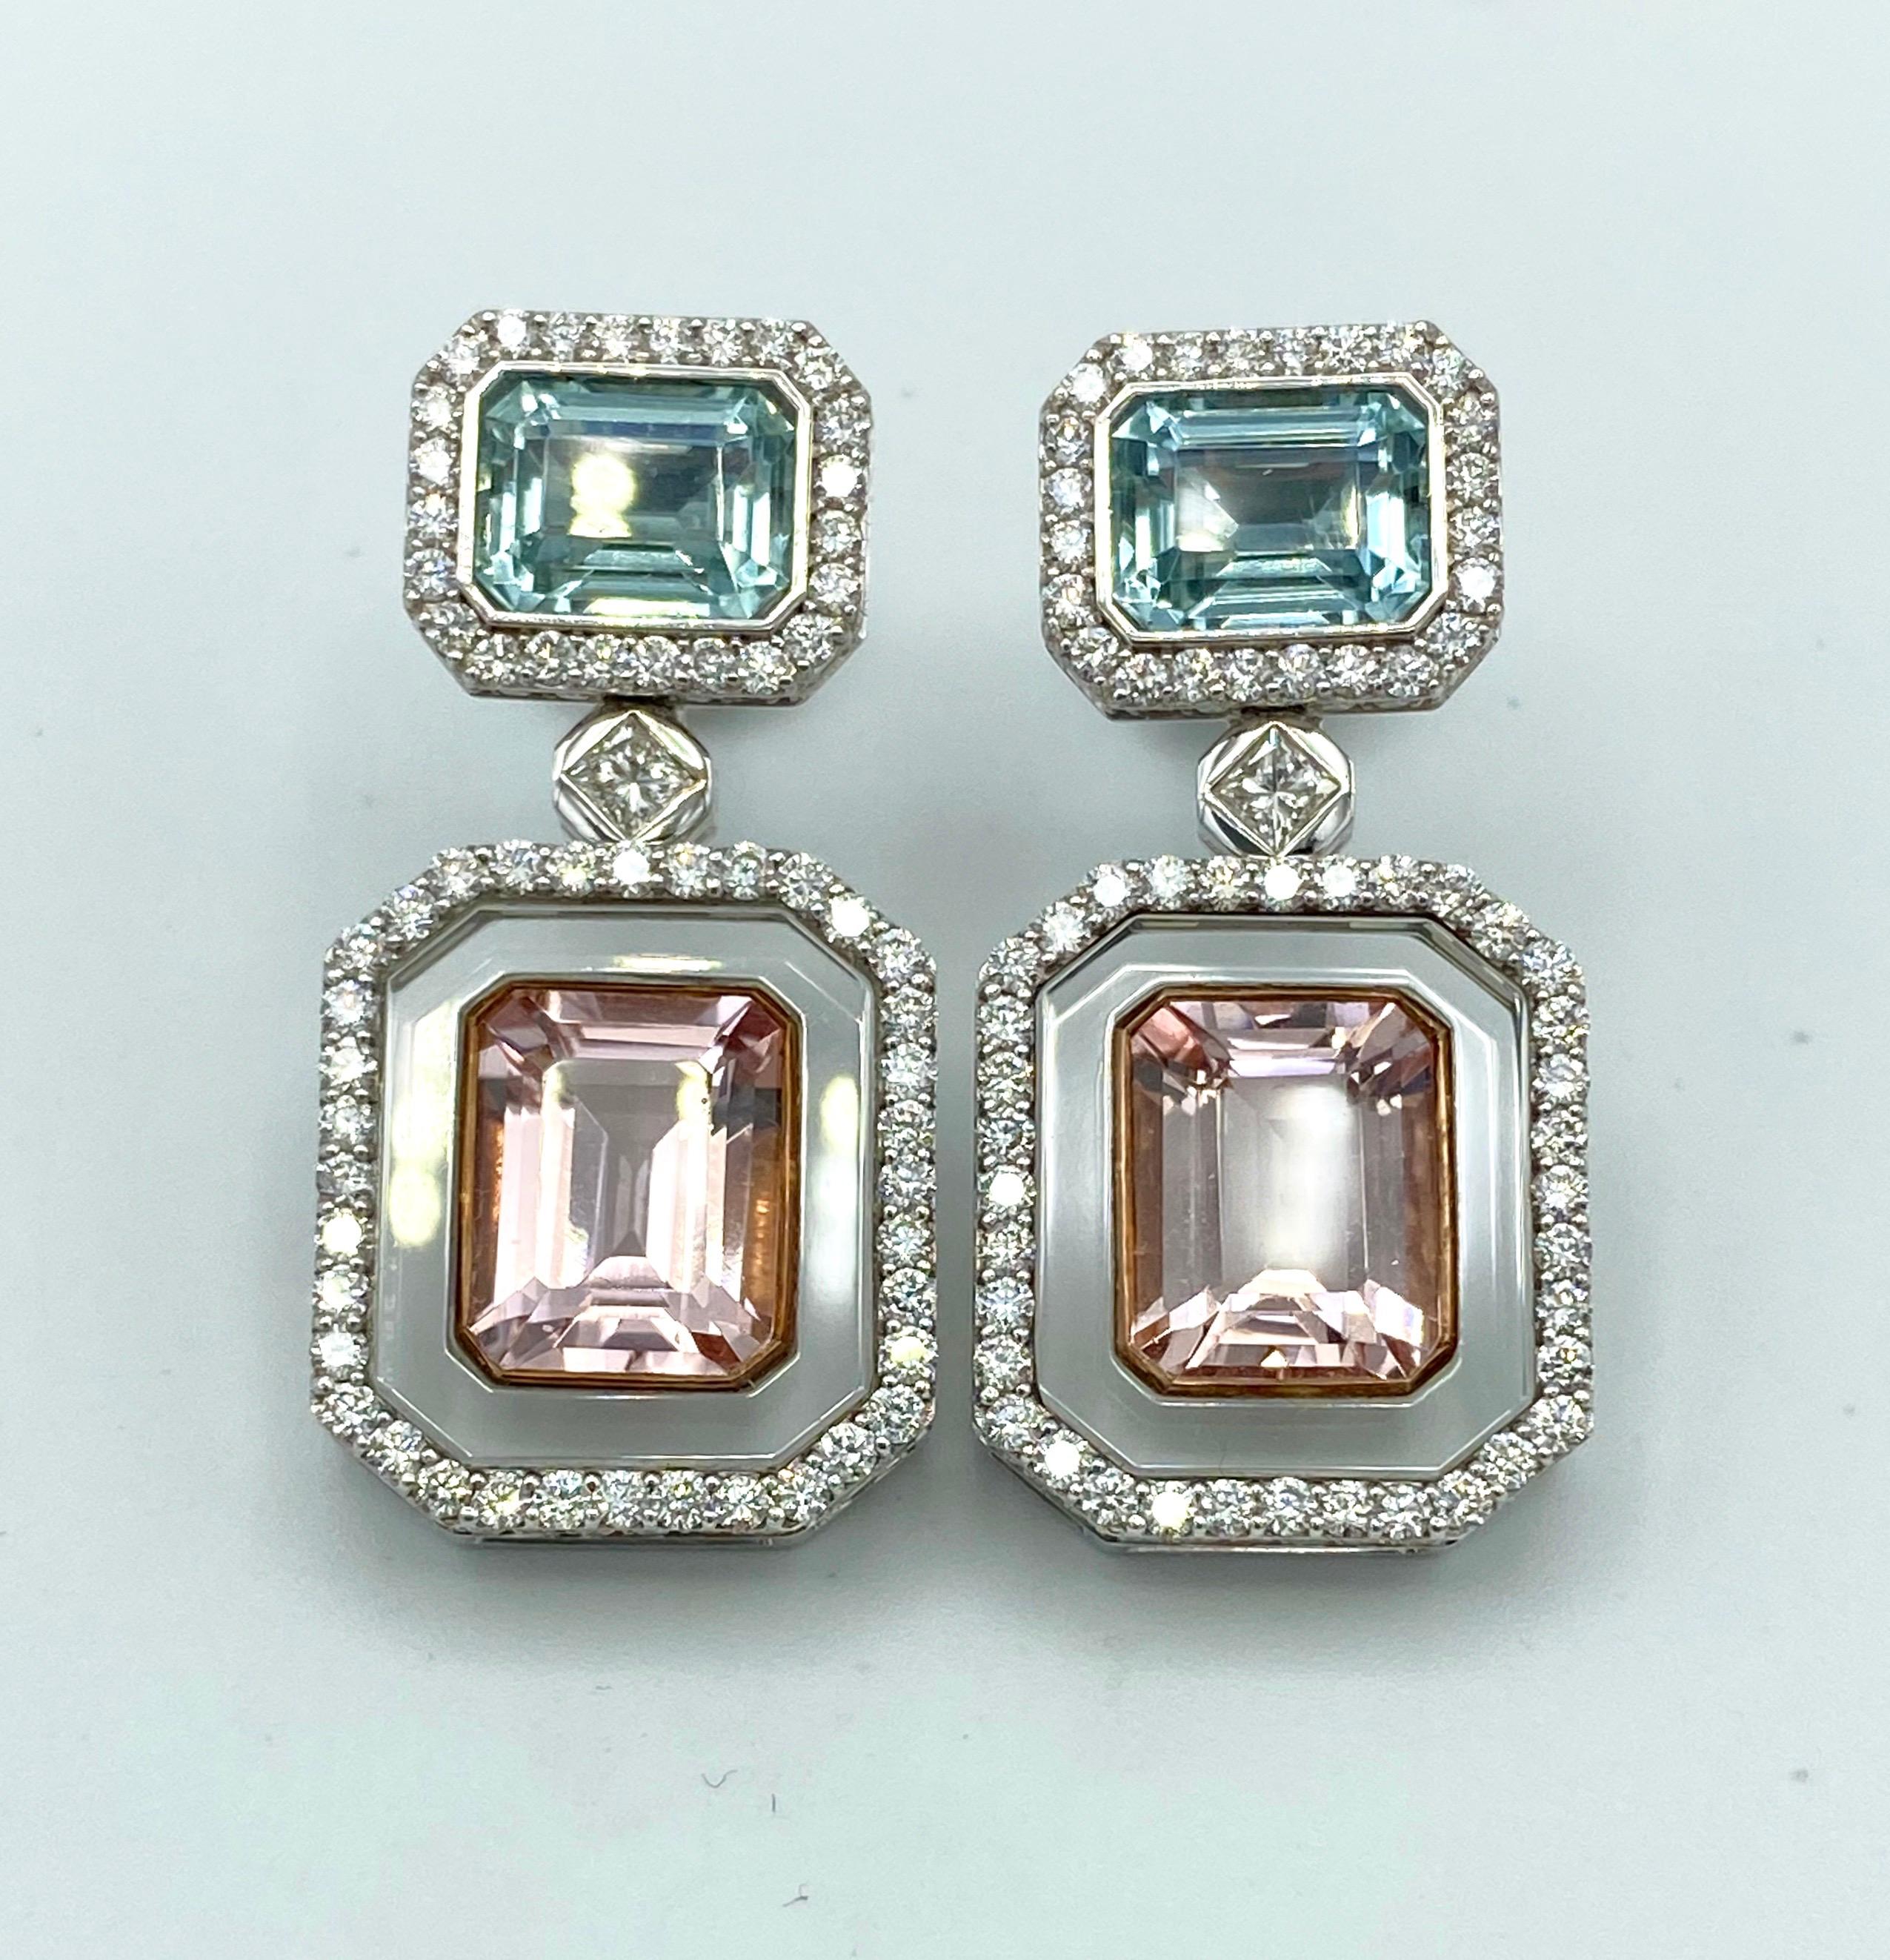 Morganite Green Beryl Diamond 18Kt Gold Rock Crystal Earrings and Jewelry Box For Sale 4